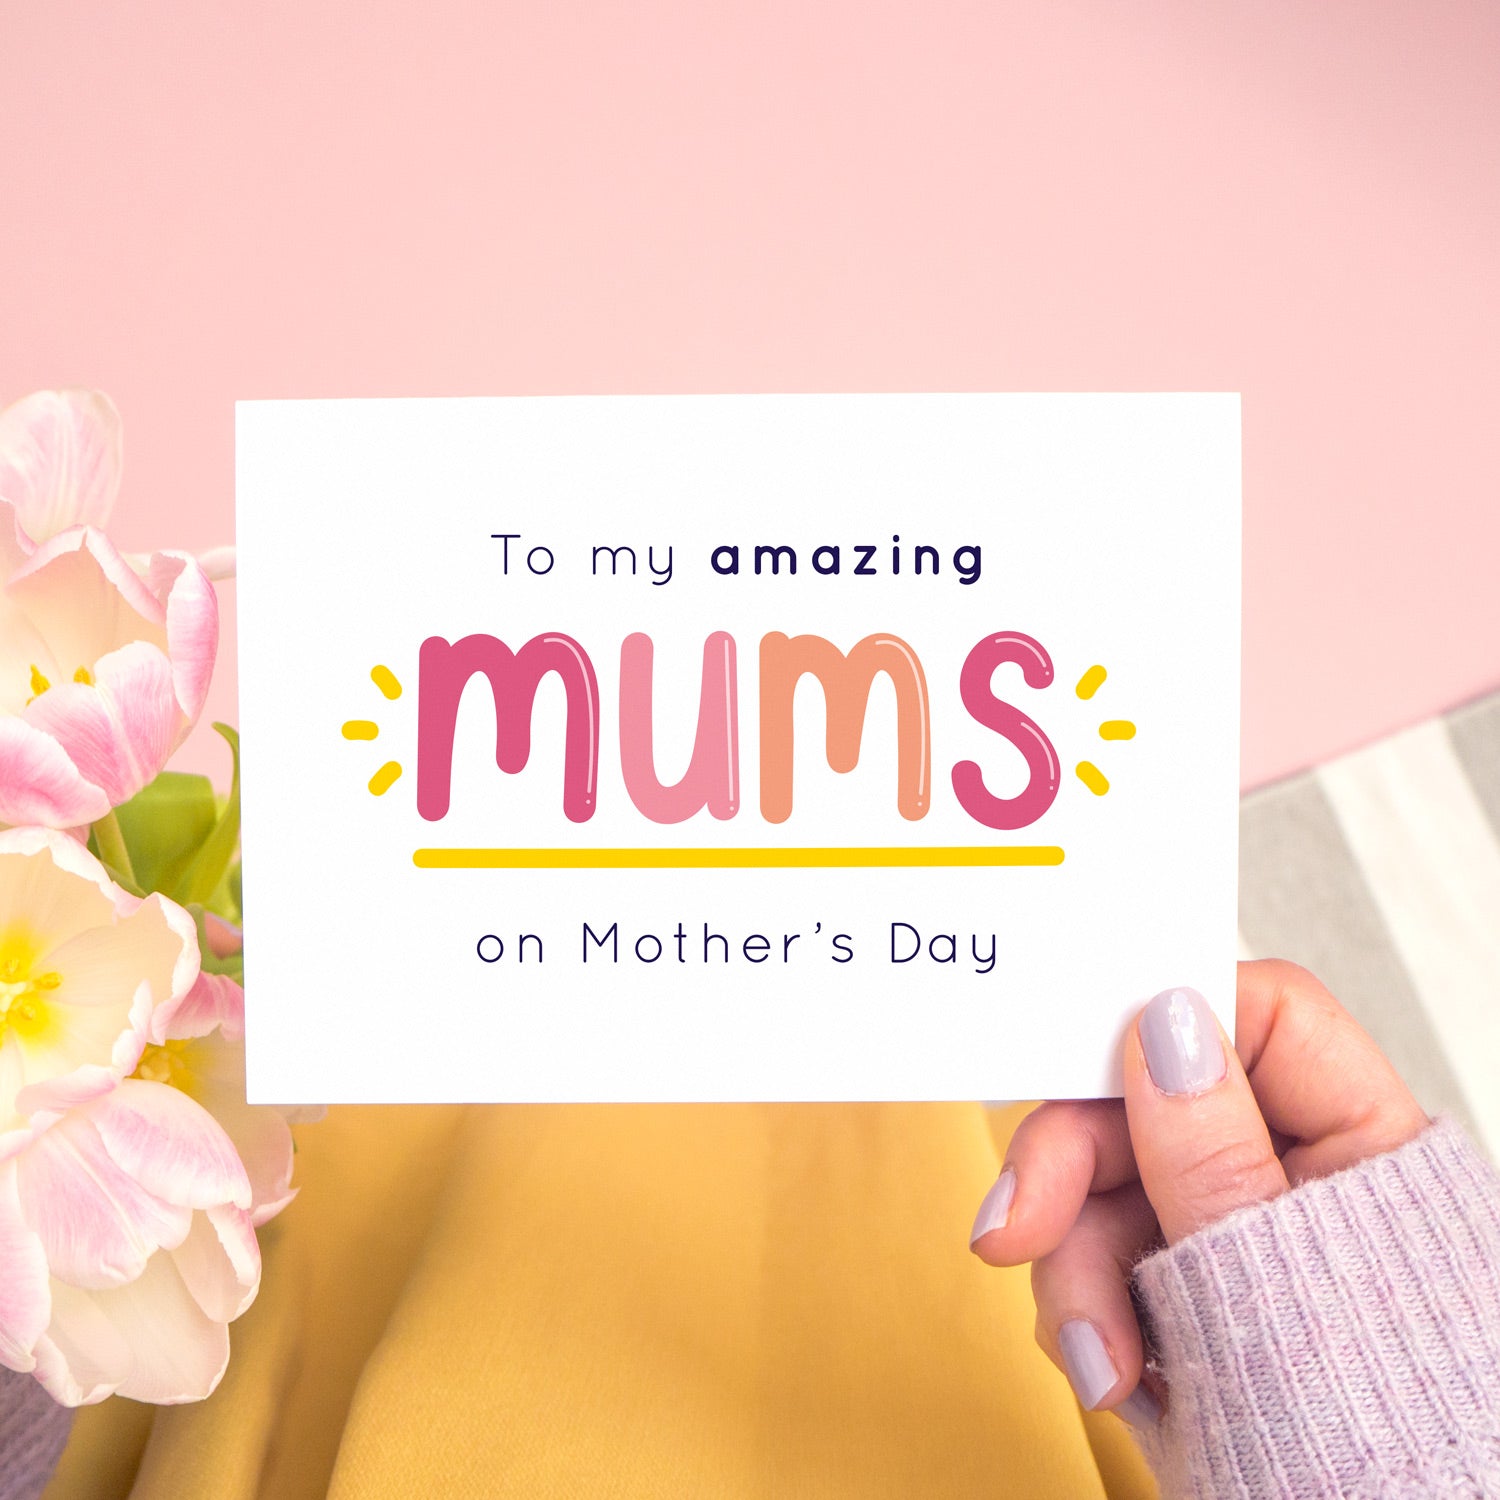 An amazing mums mother’s day card designed for those lucky enough to have two mums! This card is being held over a pink background with tulips to the left and a hand wearing purple nail varnish to the right. This card is in the pink and peach colour palette.